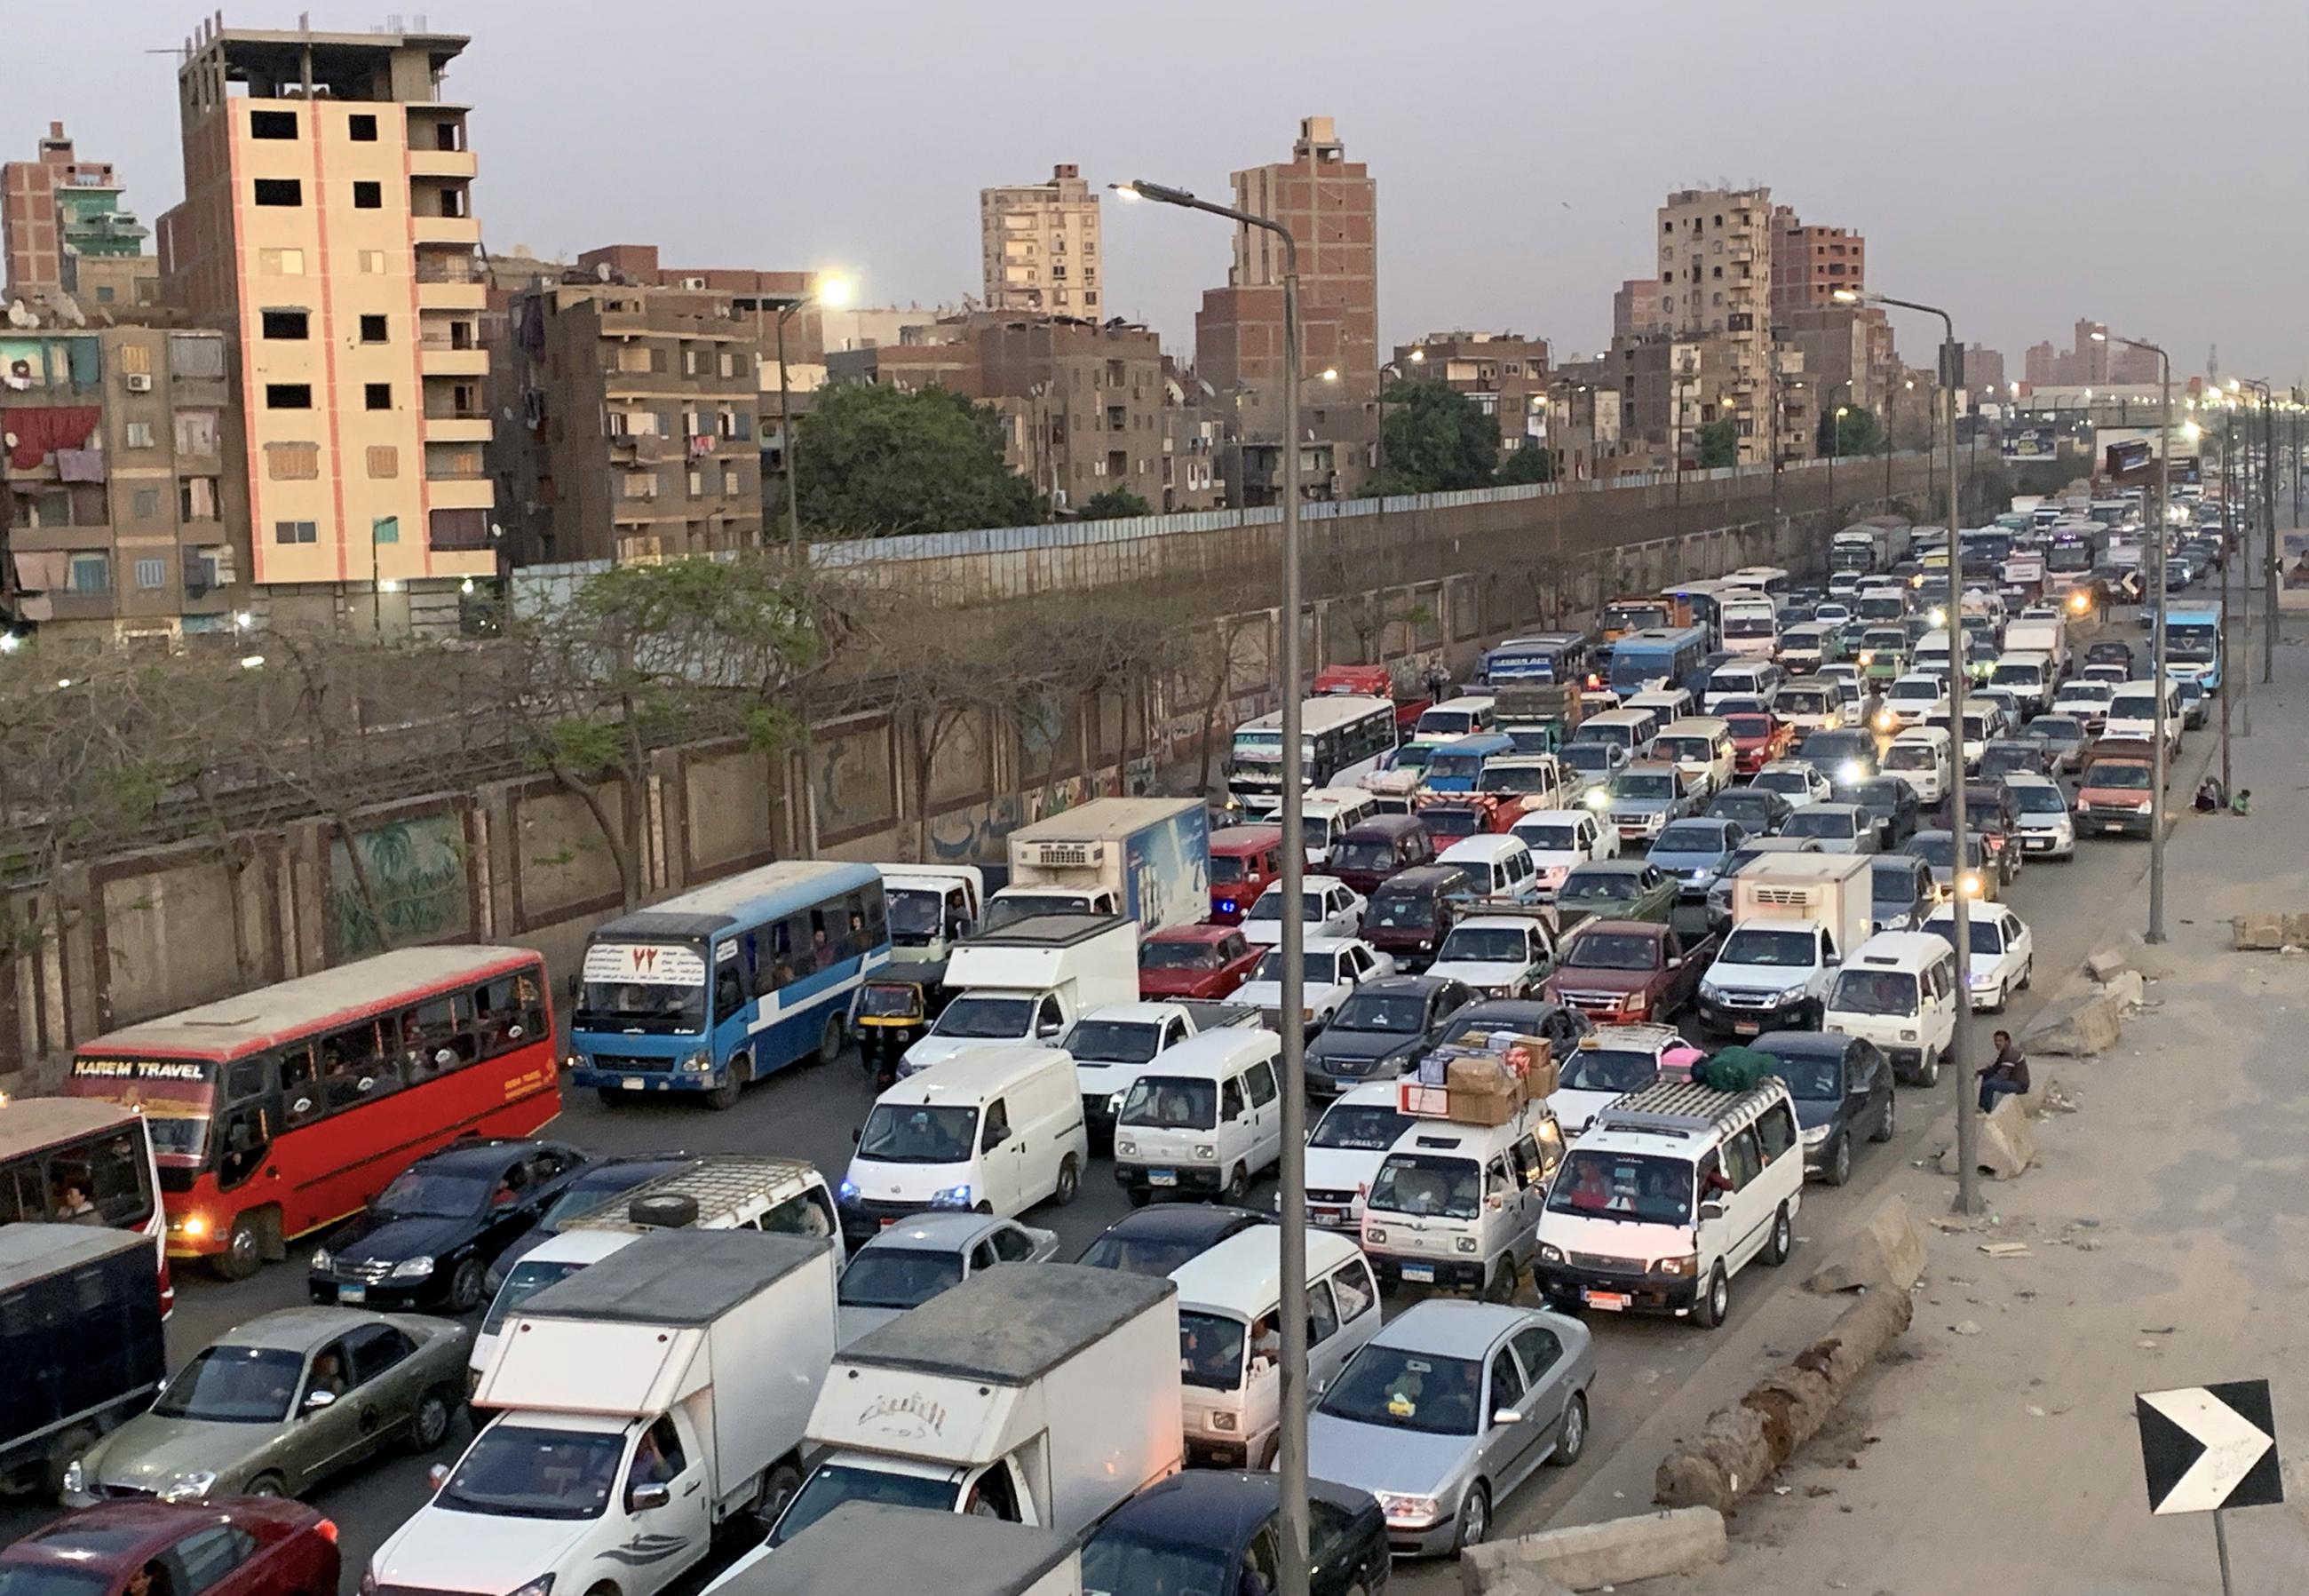 The photo shows a dusty street packed with cars and trucks. 